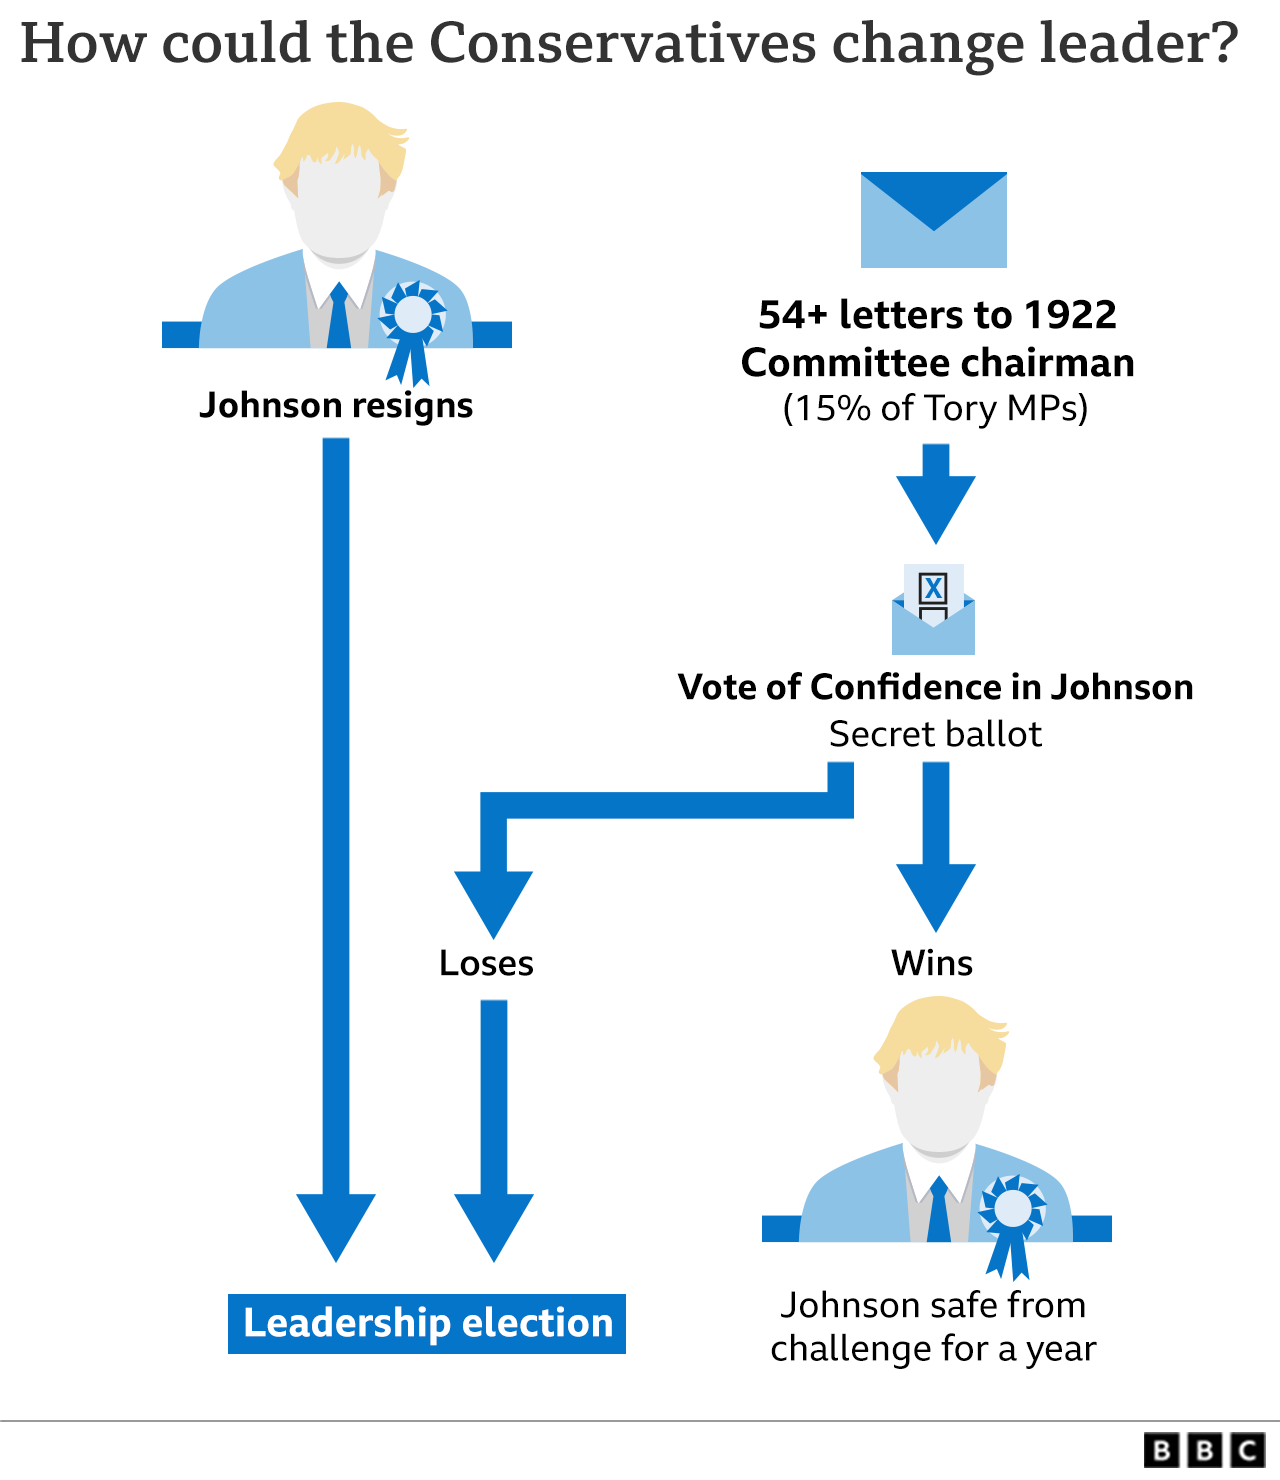 Chart: How could the Conservatives change their leader